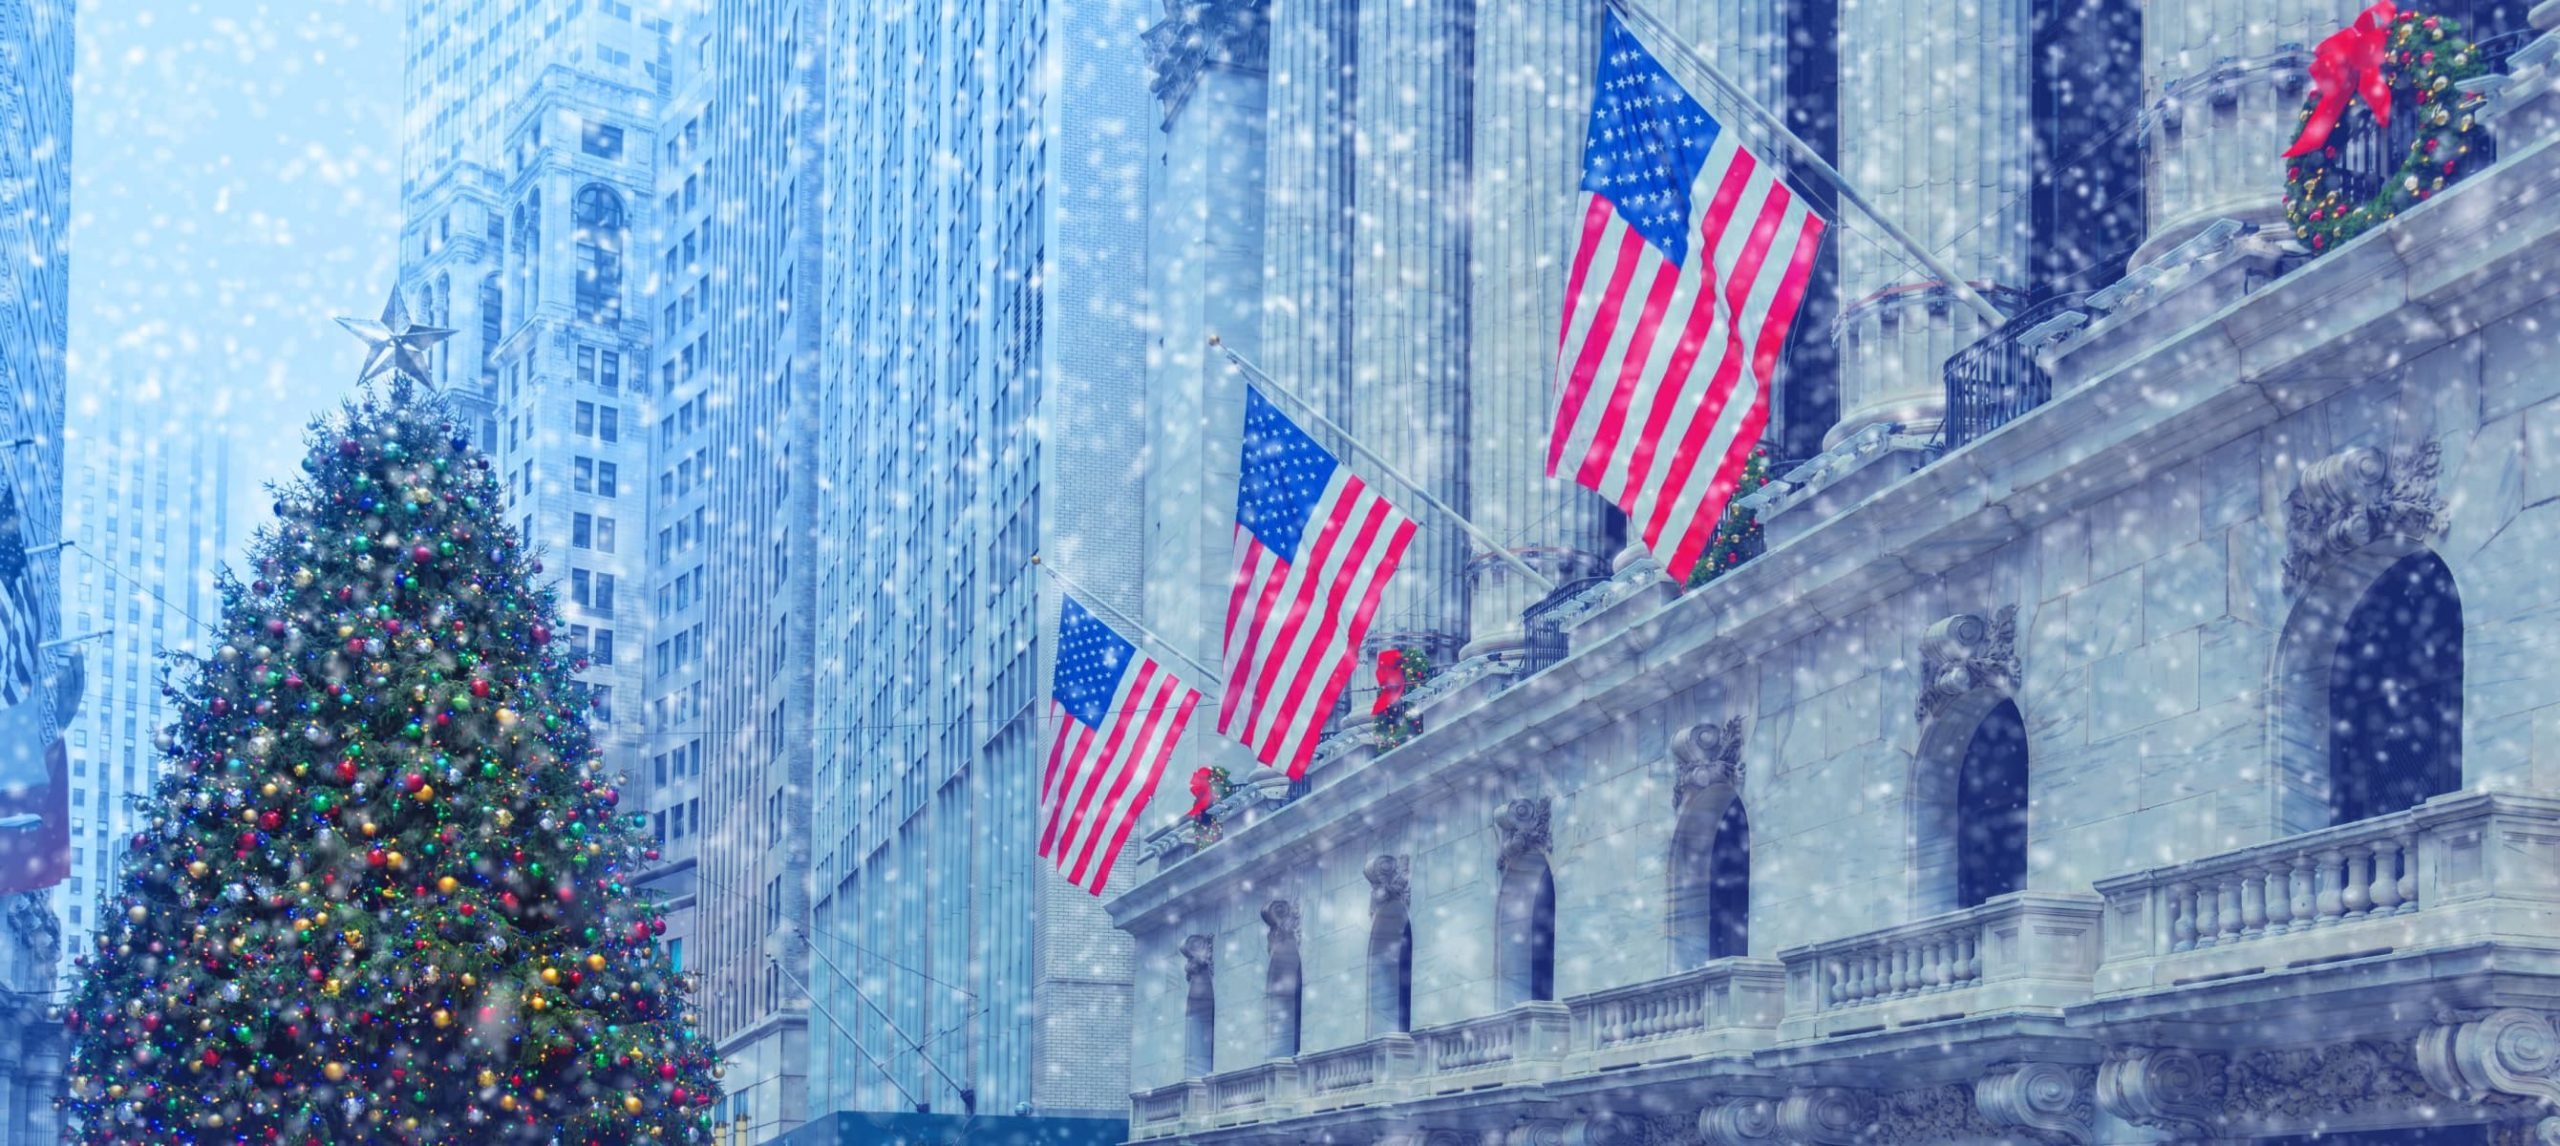 snowflakes falling in NYC